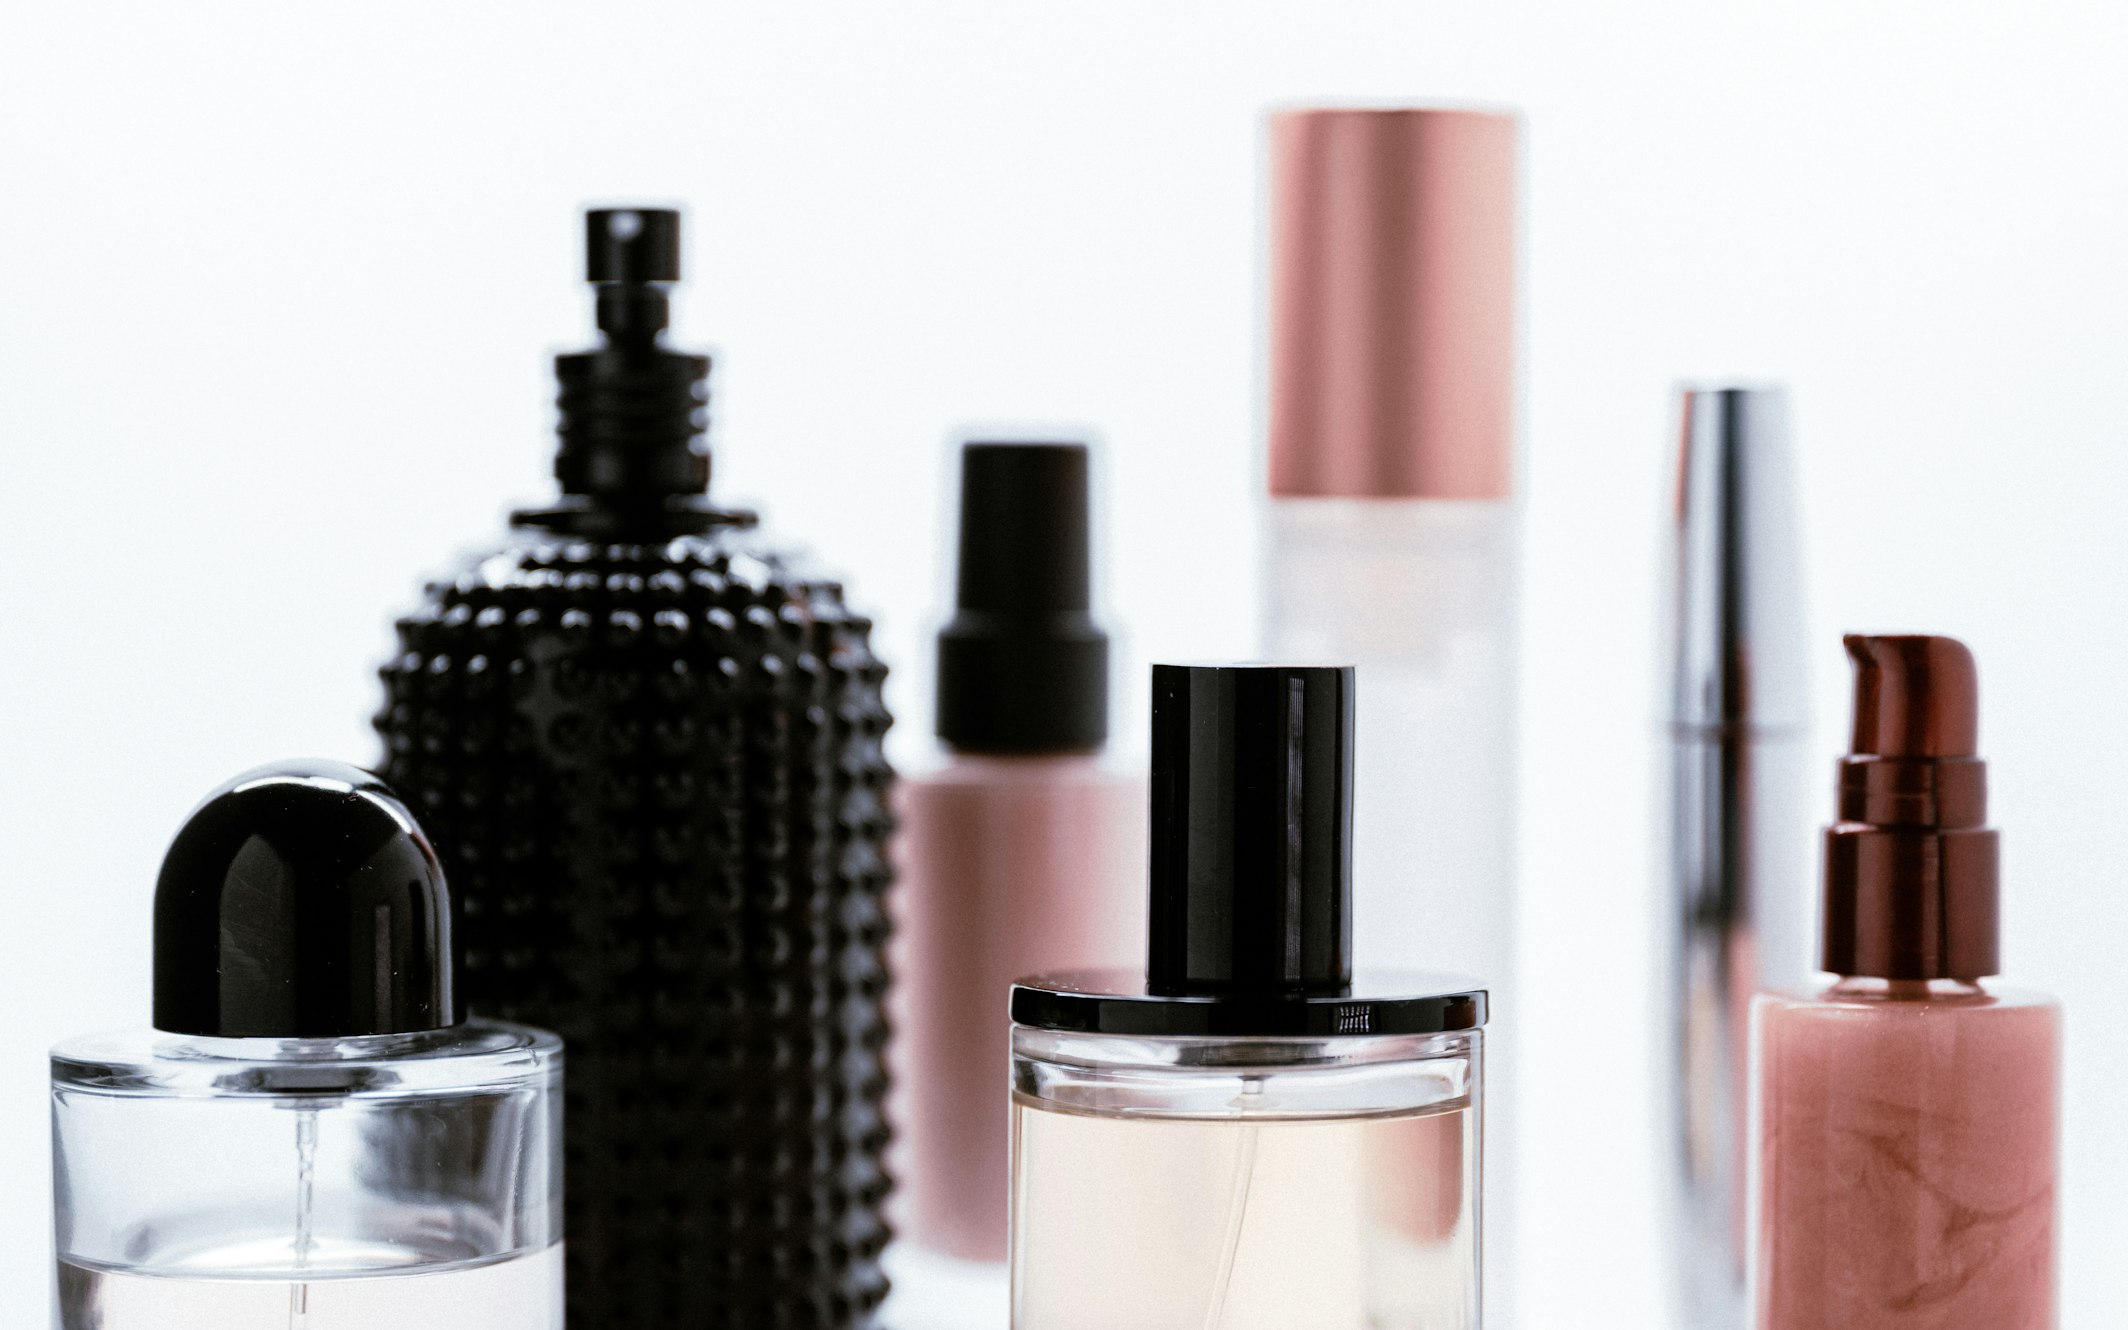 Top Dangers Posed by Chemical-Based Health and Beauty Products